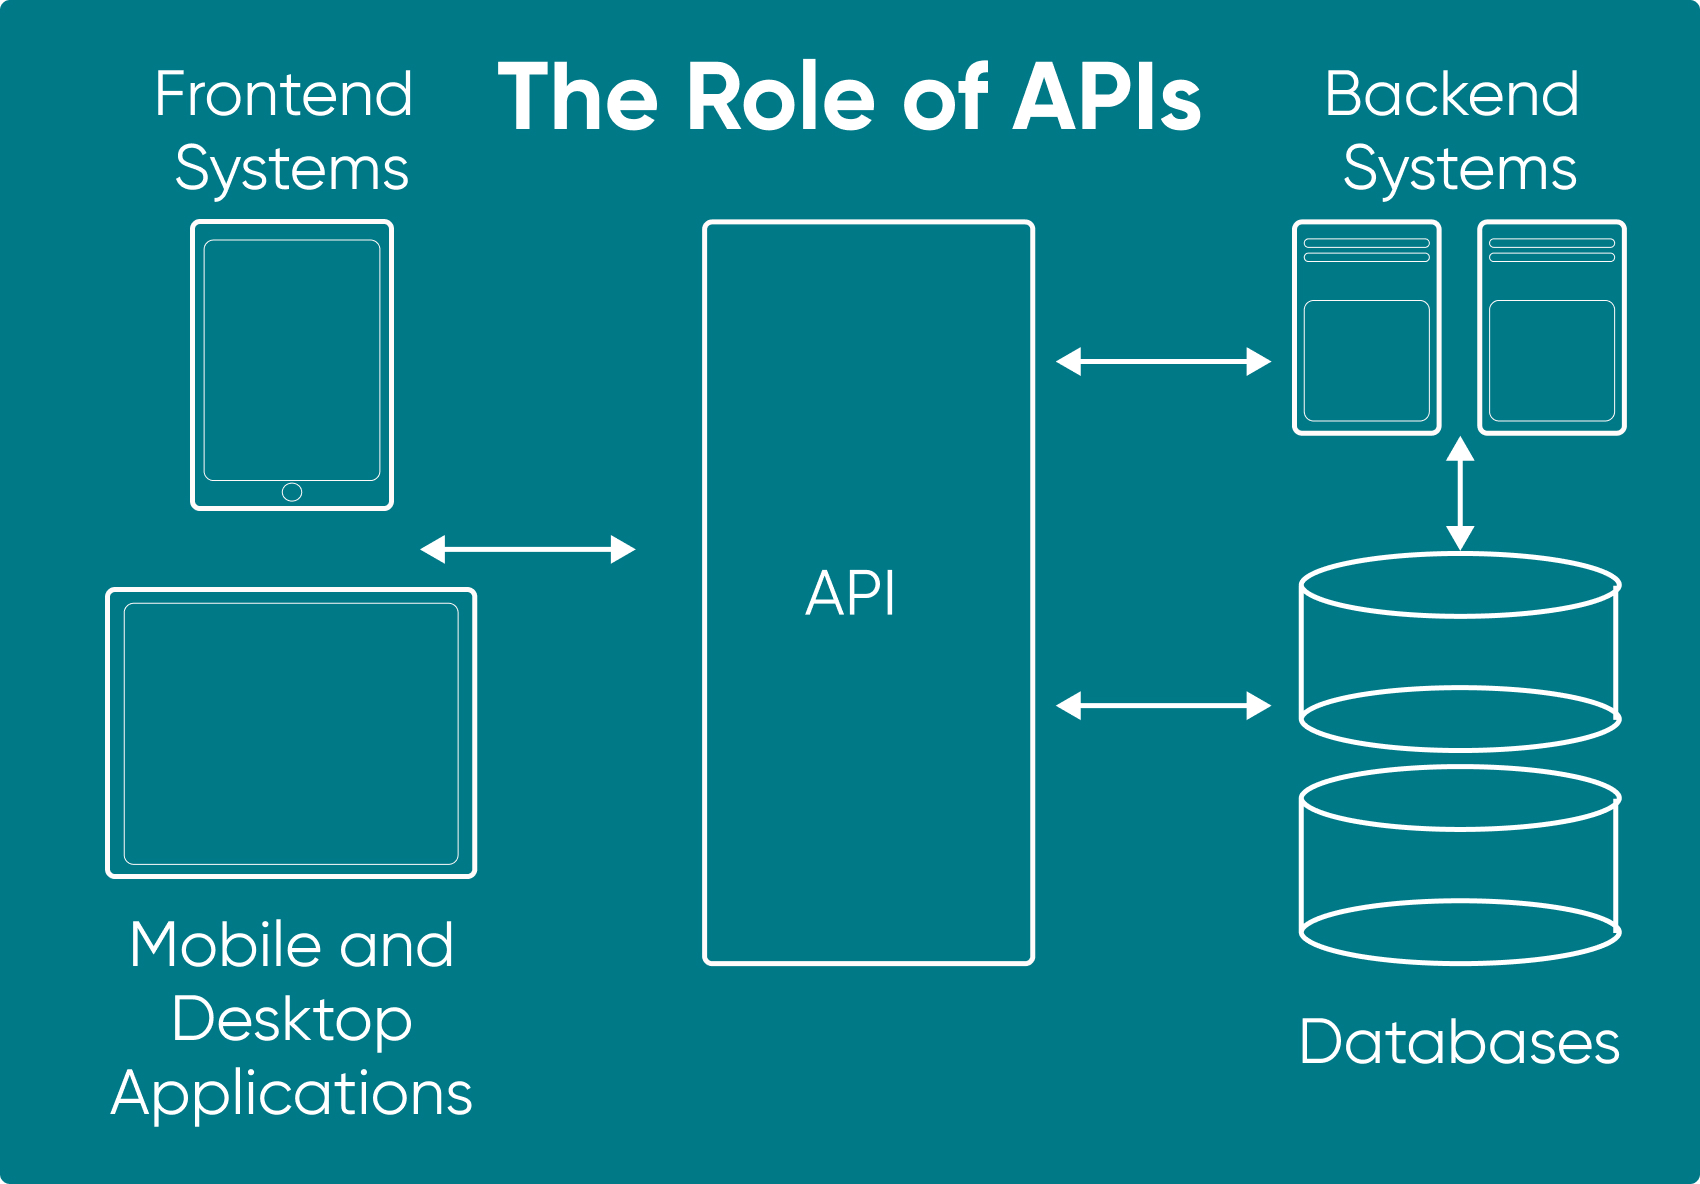 A diagram showing the role of APIs and the connections between the frontend and backend.